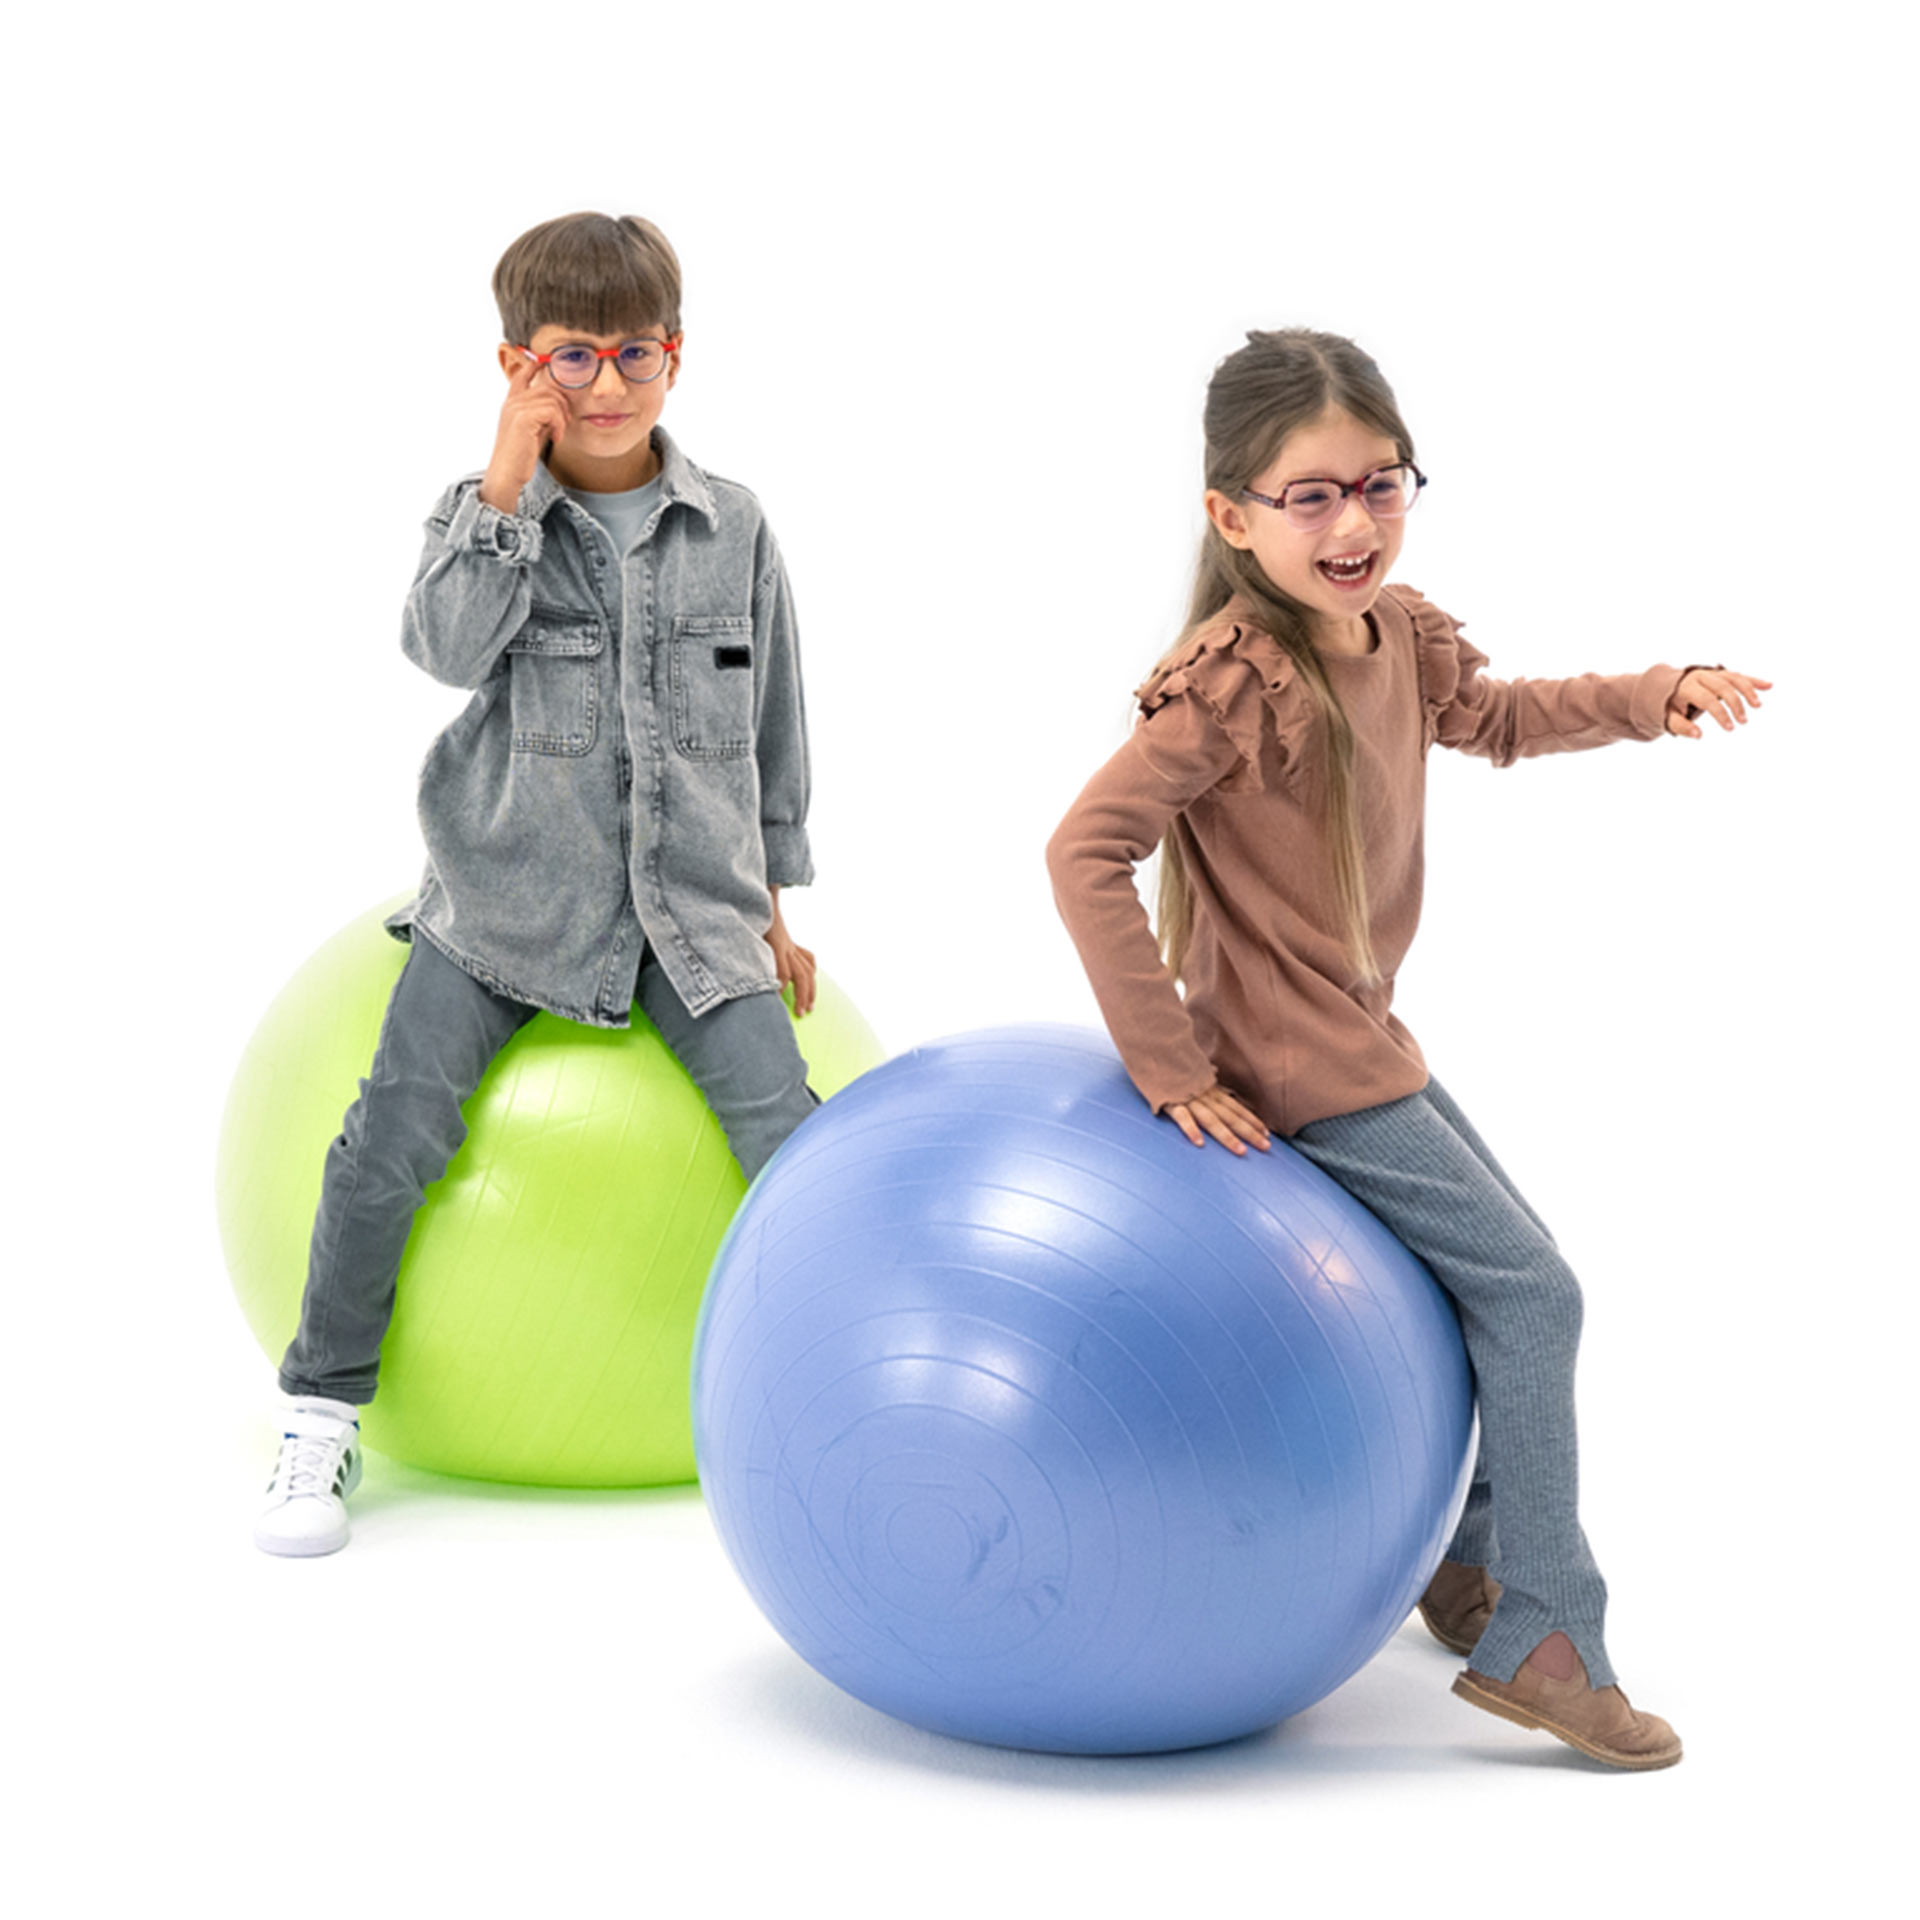 A boy and a girl, both wearing glasses, are bouncing playfully on gym balls.